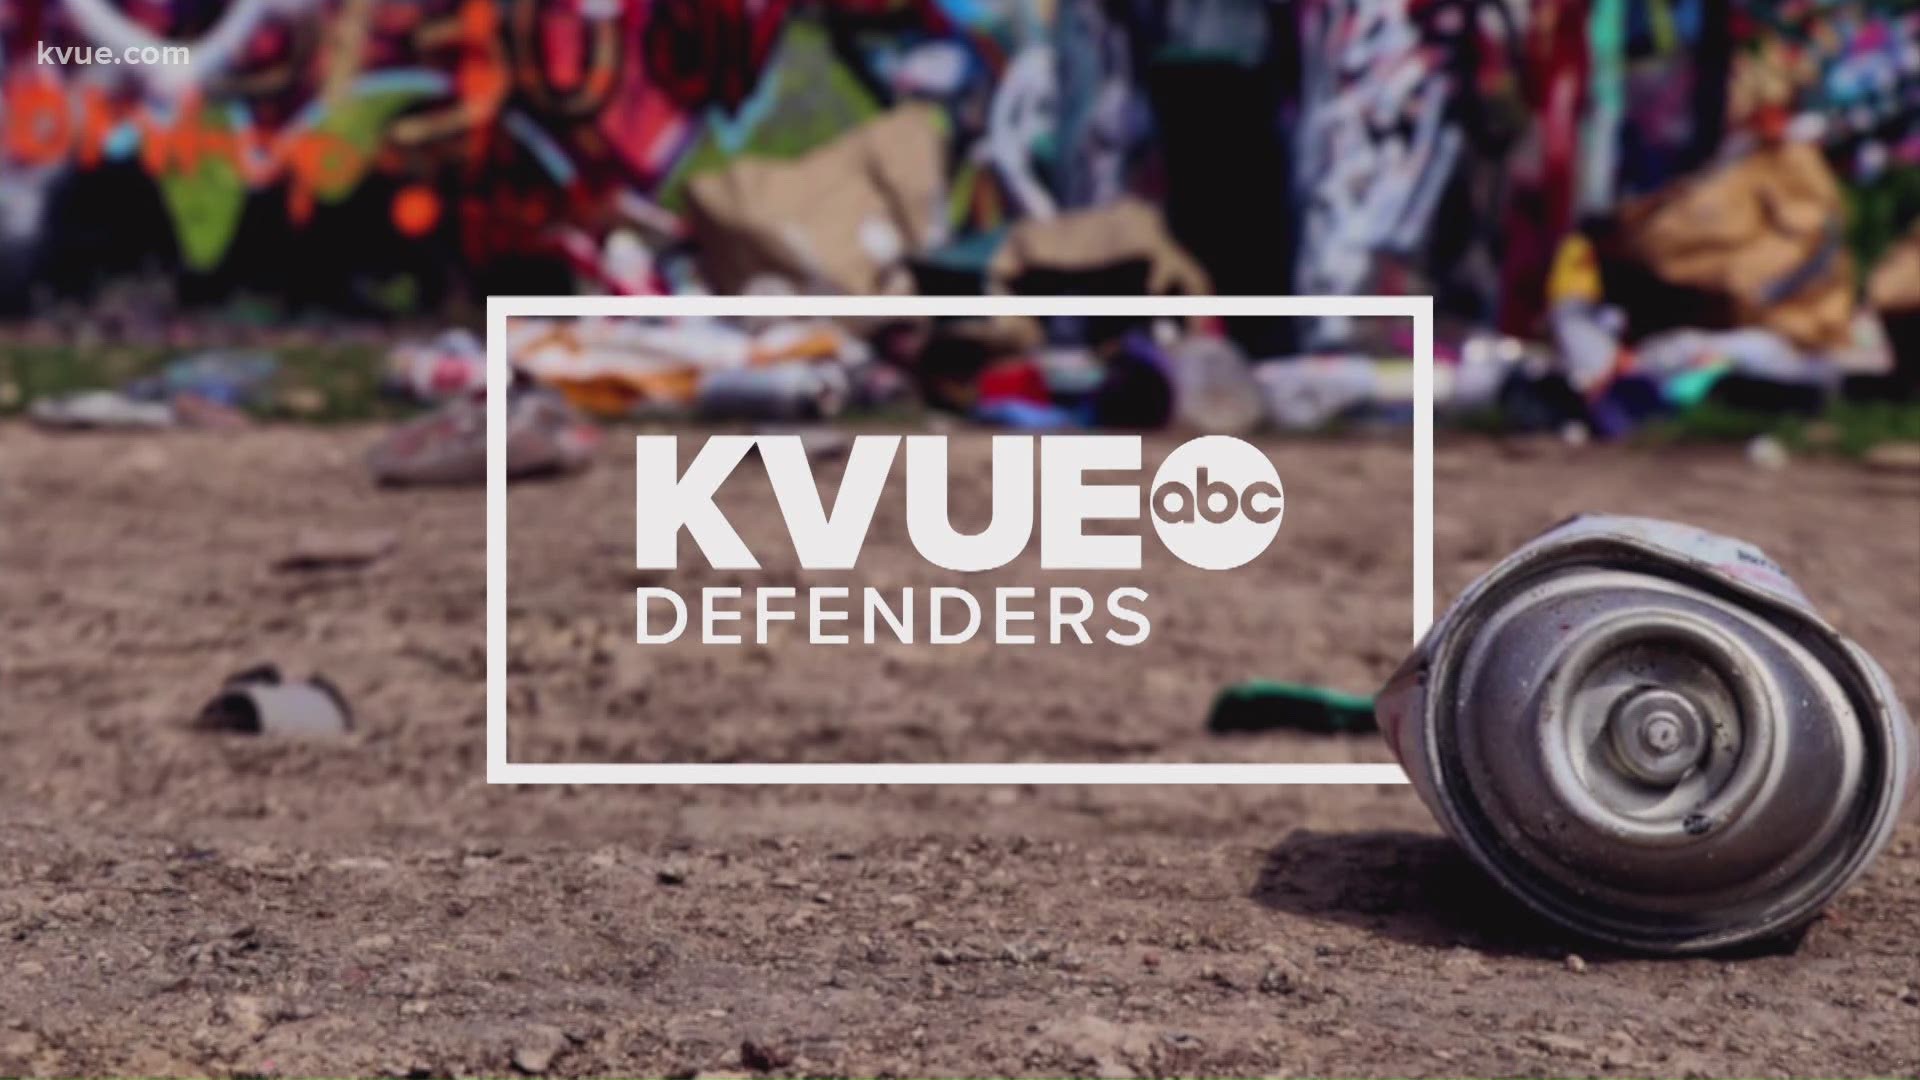 The KVUE Defenders are answering your COVID-19 questions every night.